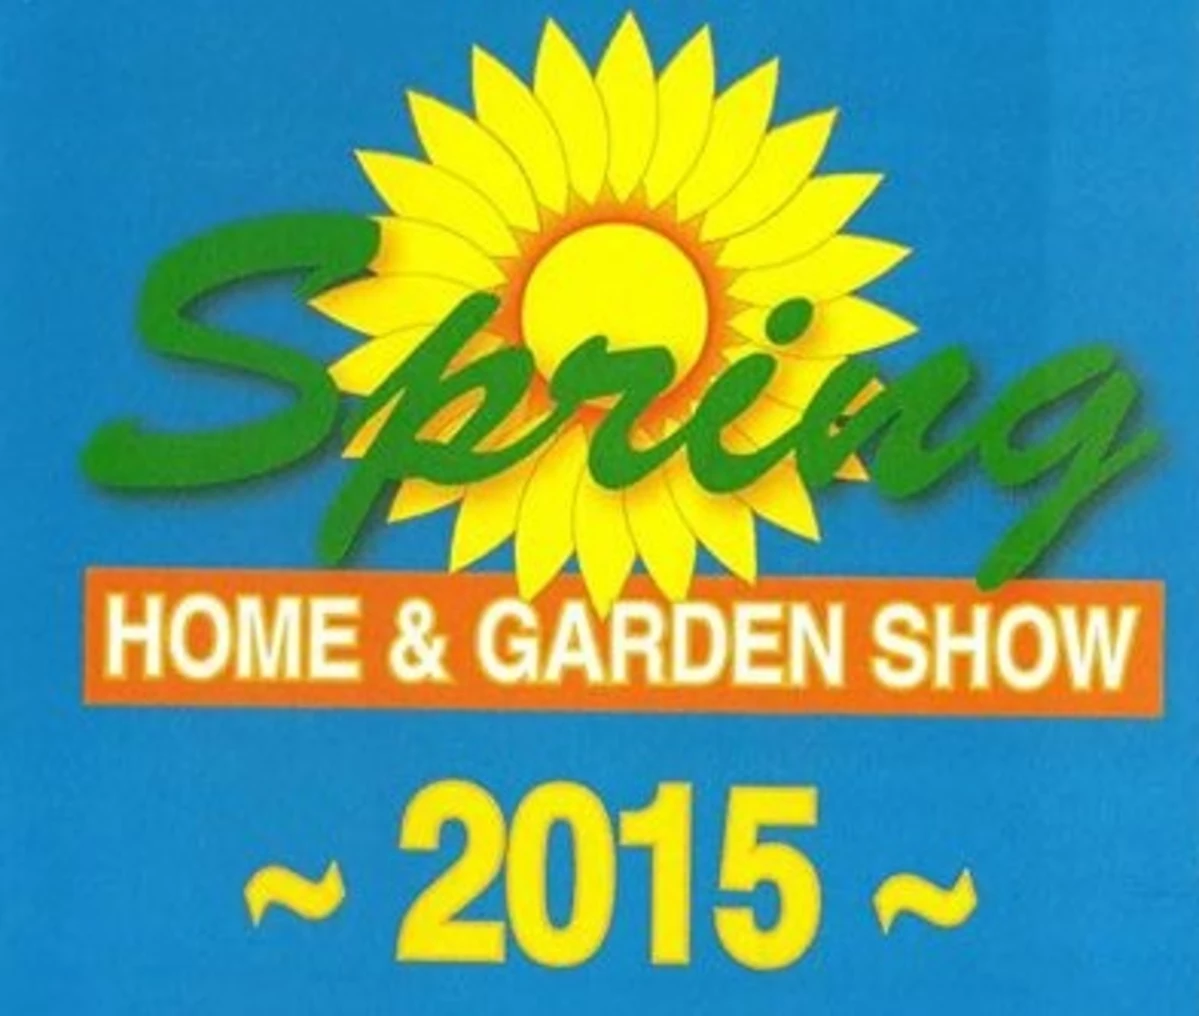 The Spring Home & Garden Show is This Weekend at the Gallatin County